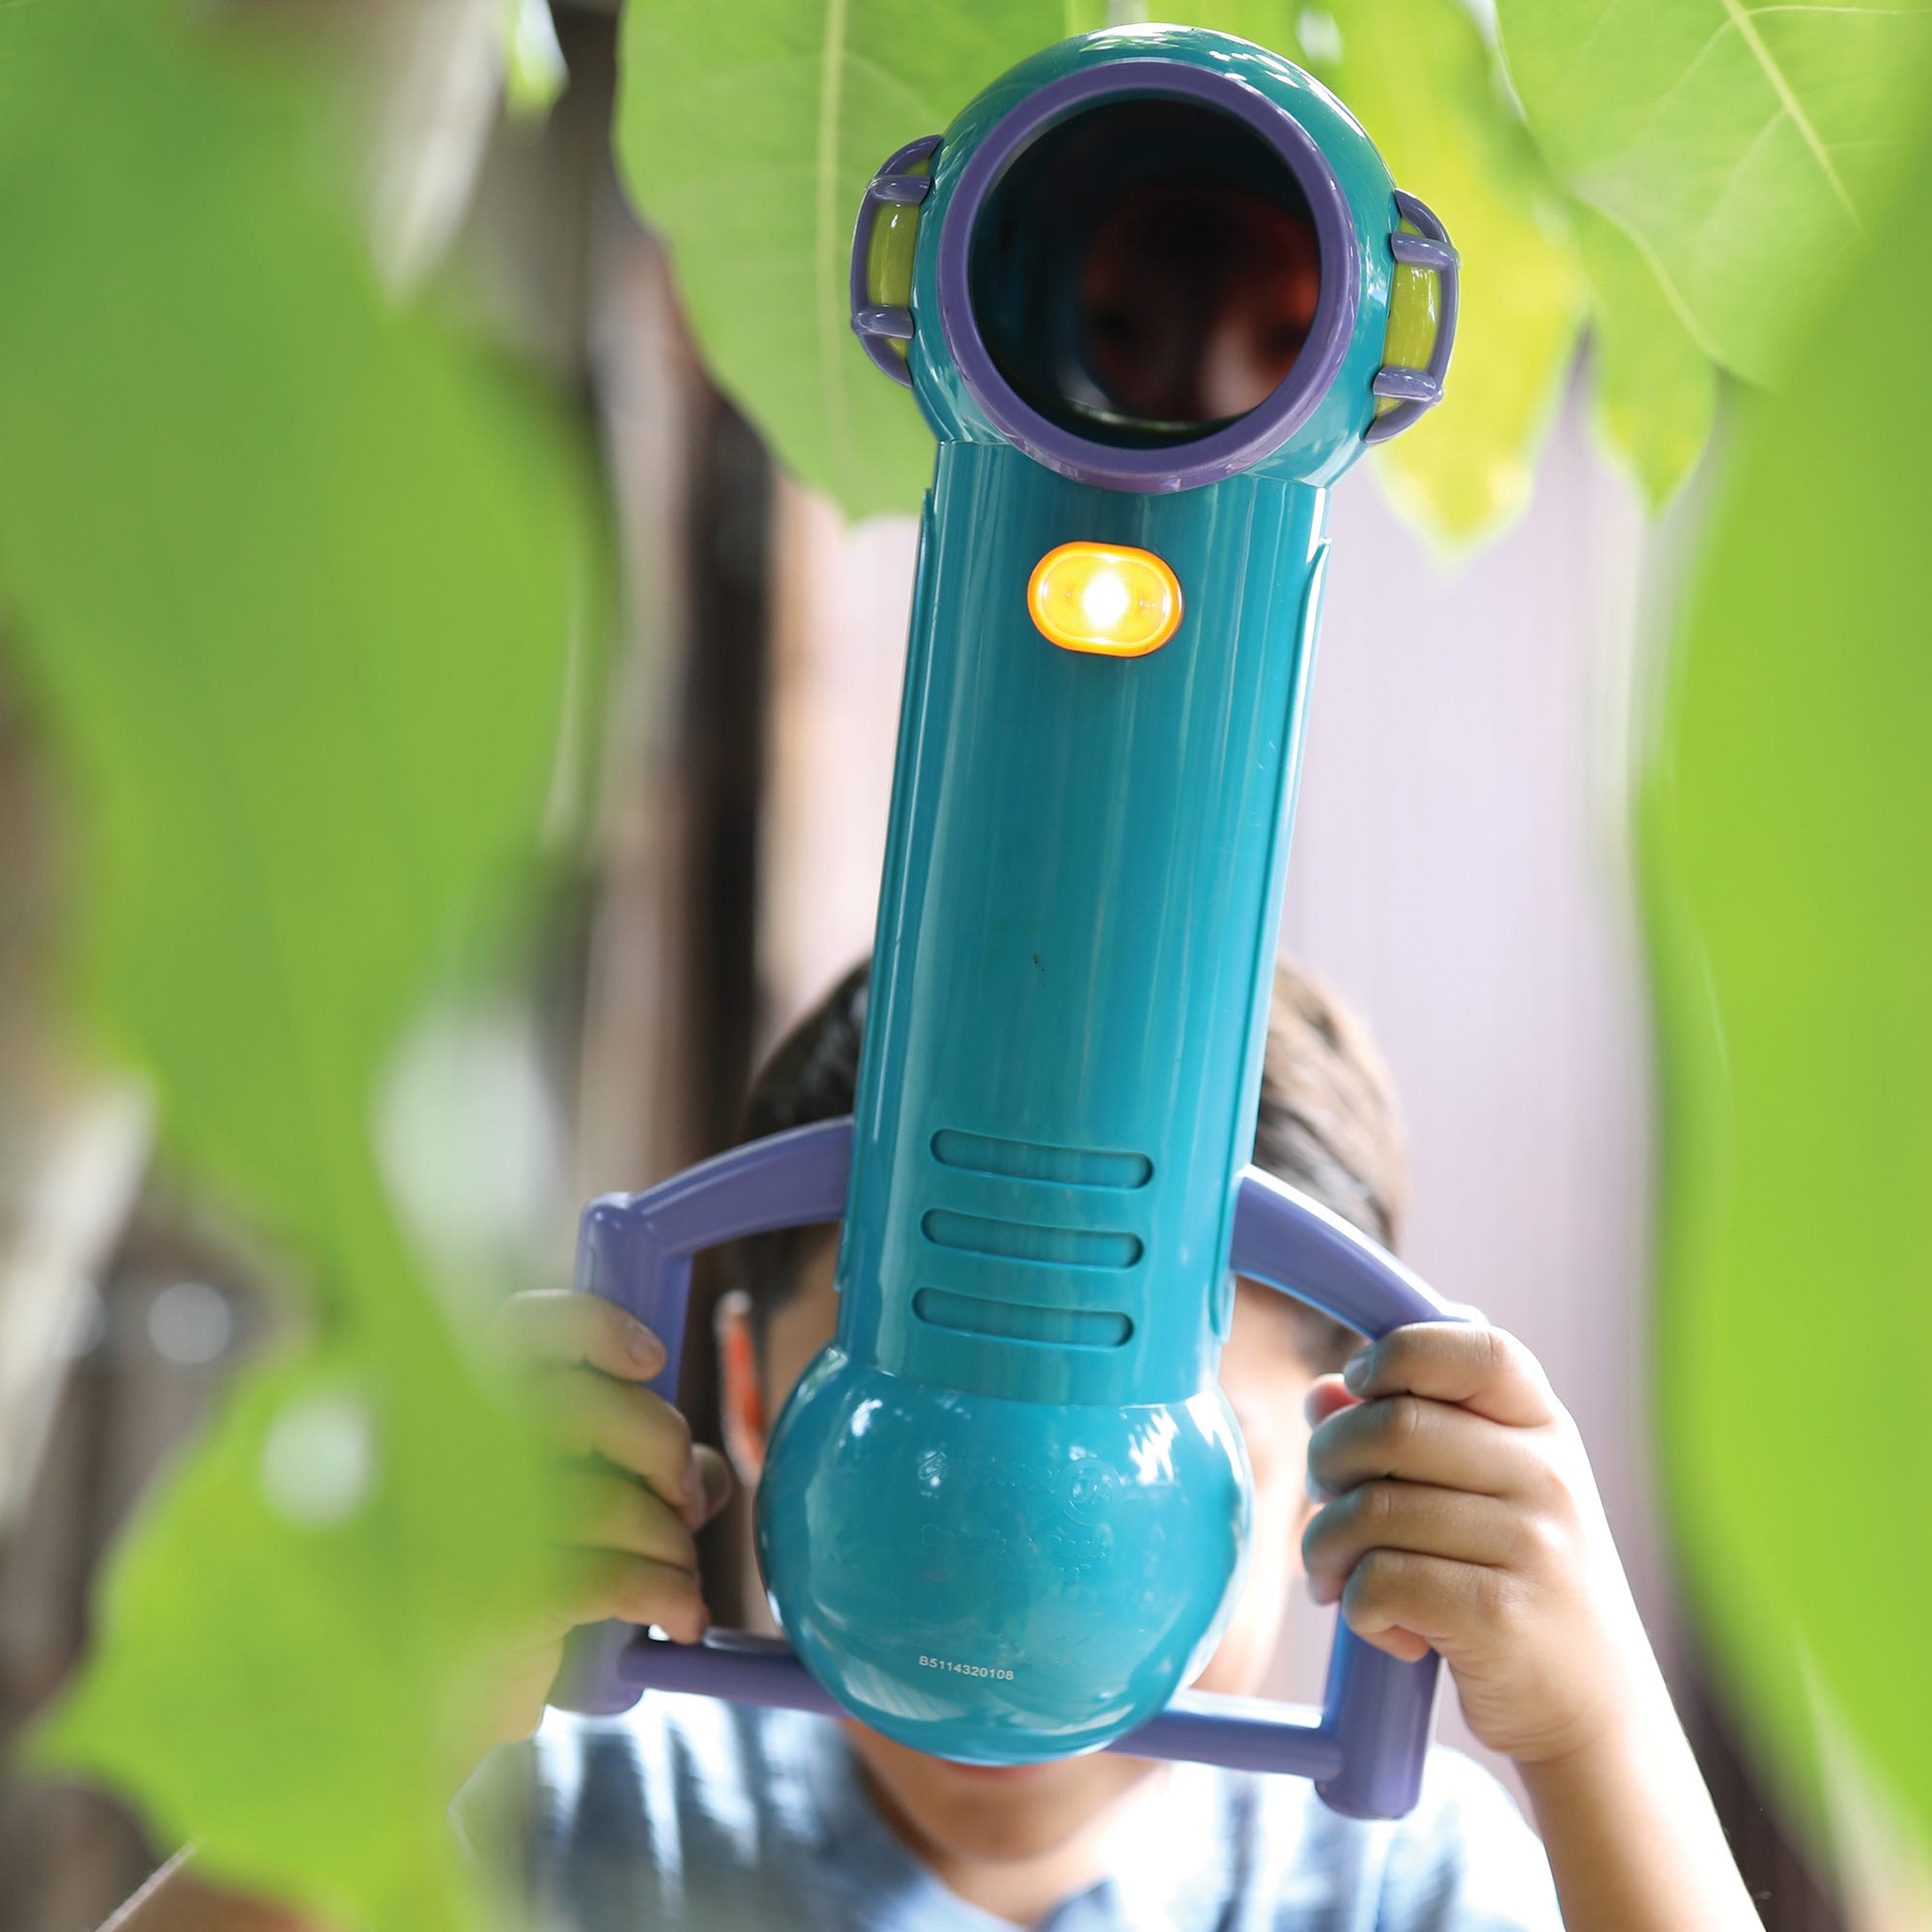 GeoSafari Jr Sneak & Peek Periscope, Observe nature from a secret hideout using this exciting new GeoSafari Jr Sneak & Peek Periscope. Young explorers can remain undetected as they peek over large rocks or around trees. The GeoSafari Jr Sneak & Peek Periscope has a featured LED light to spy on nocturnal animals or peer into a dark space. The GeoSafari Jr Sneak & Peek Periscope has a wide viewing area so little ones can see far and wide while easy grip handles and soft goggles with a comfortable nose placeme